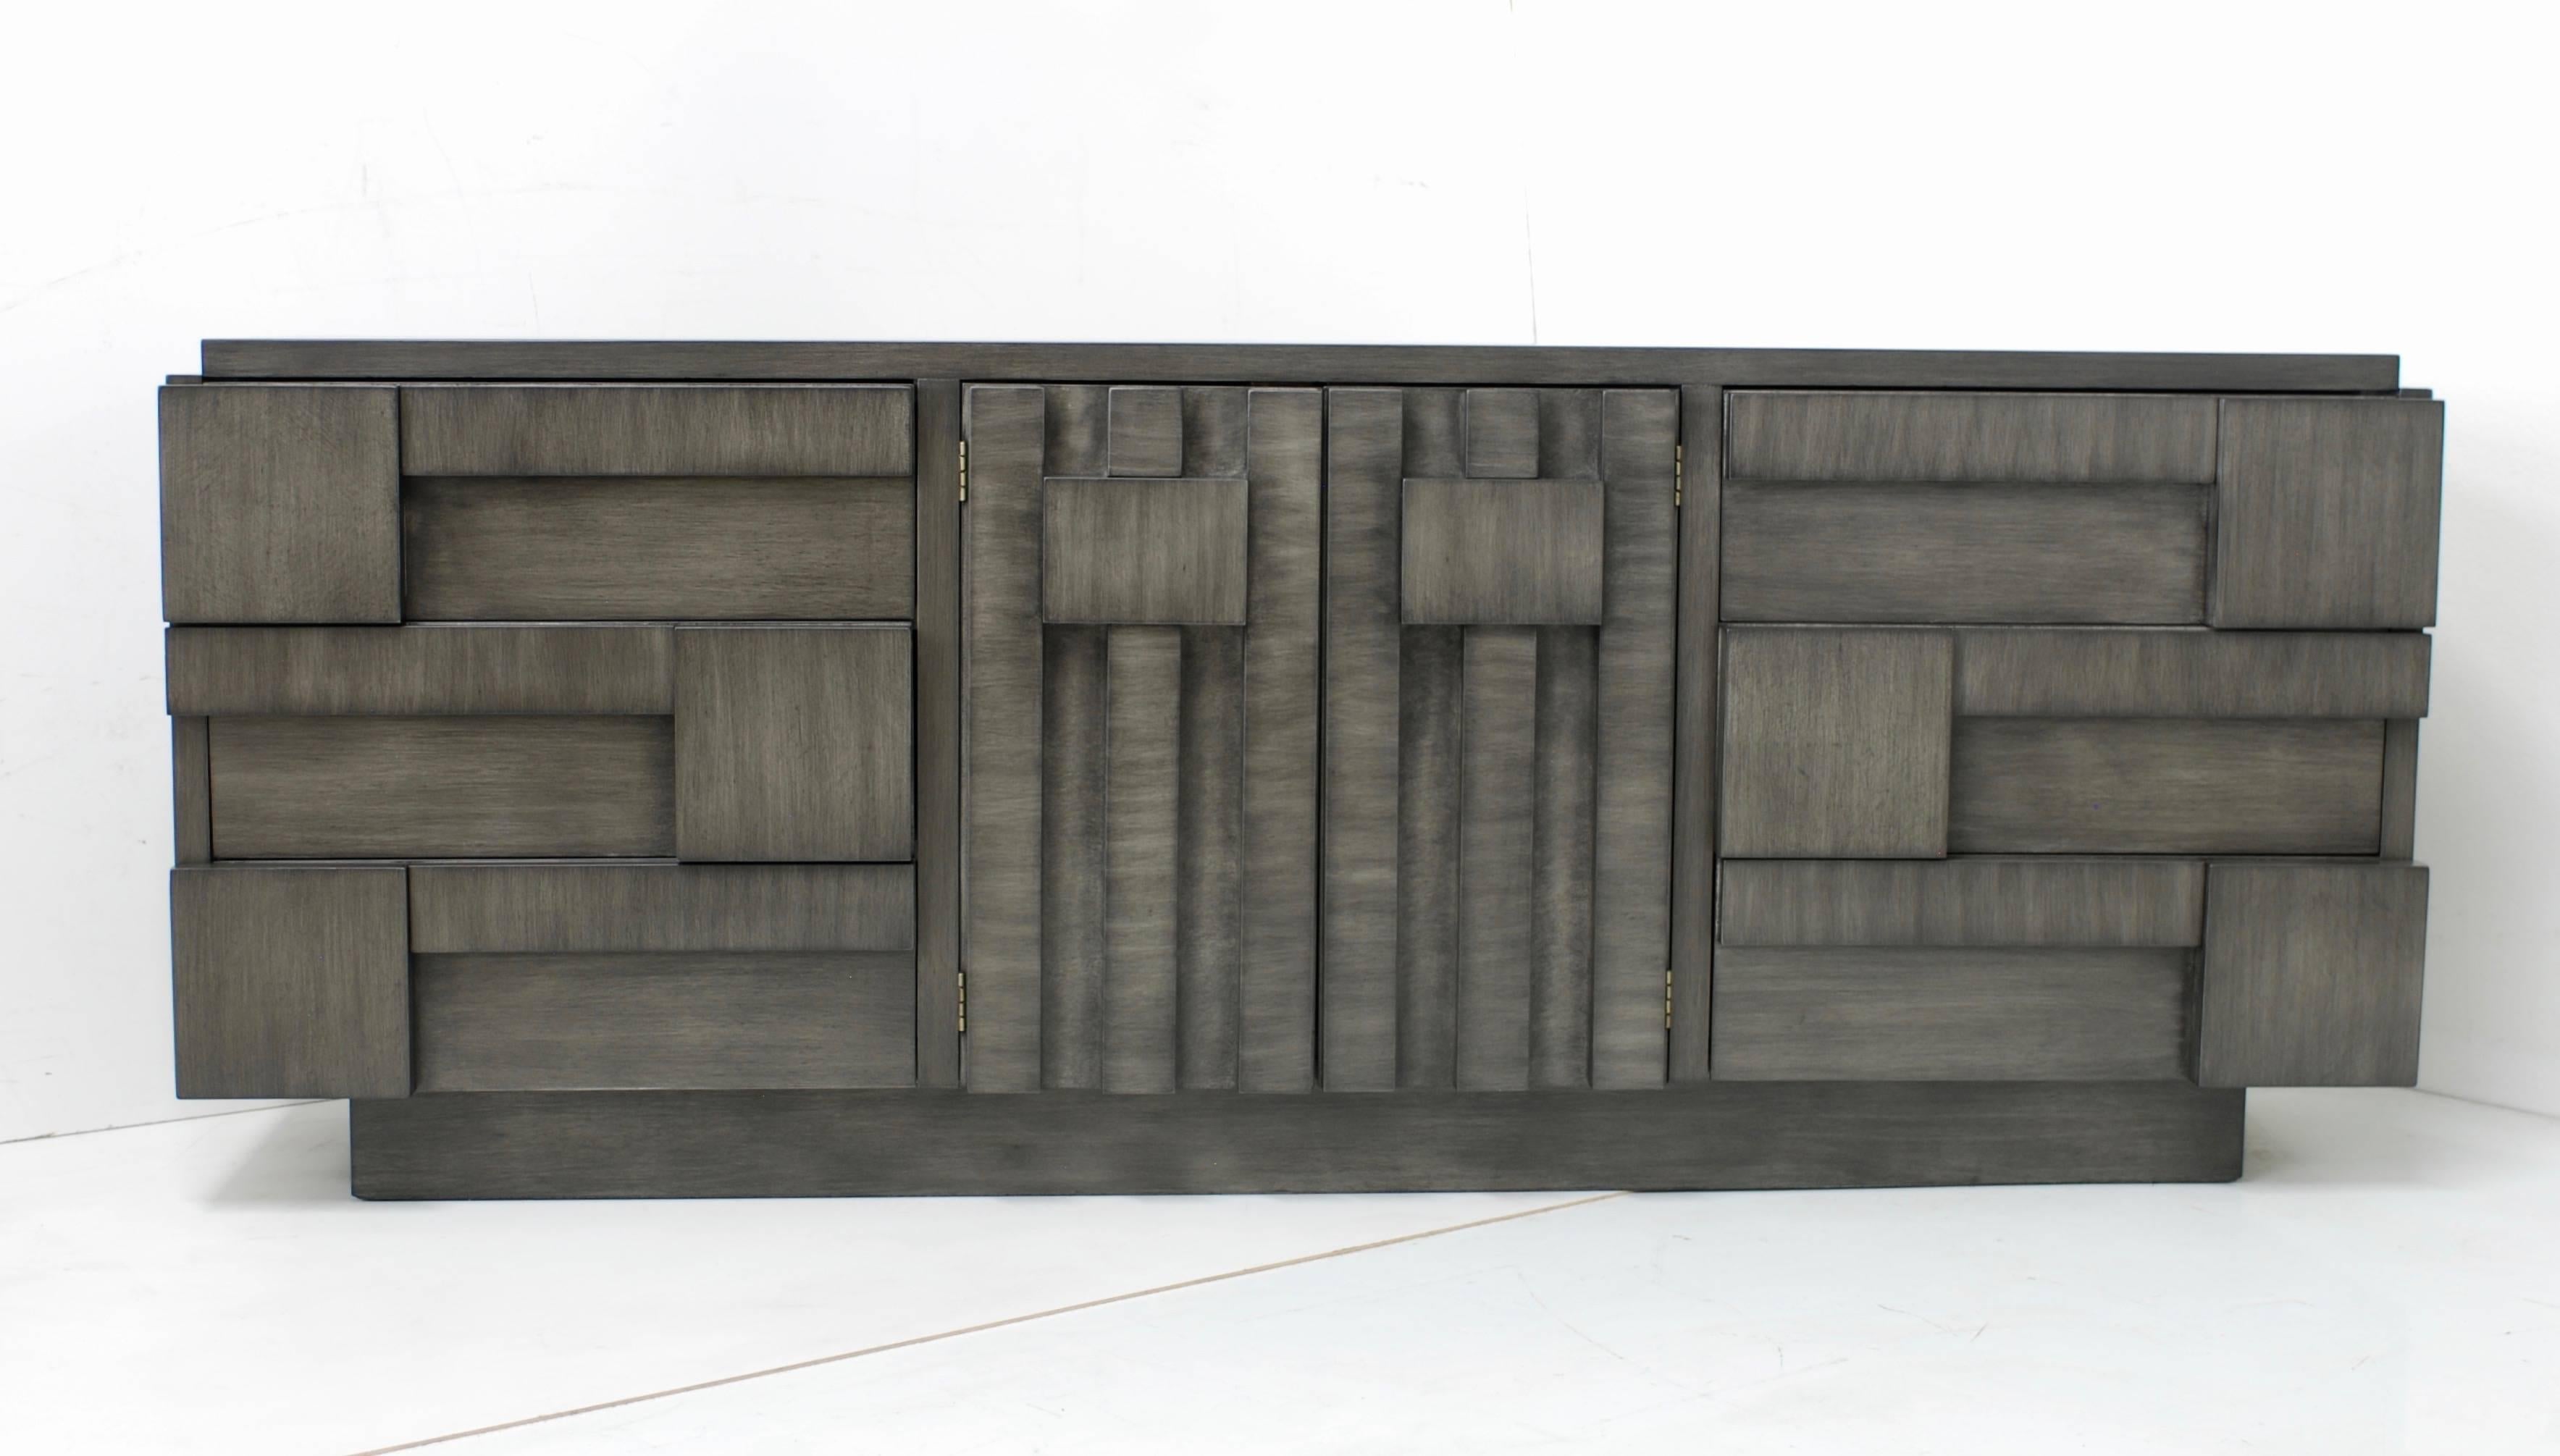 This 'Mosaic' line midcentury Brutalist cabinet or dresser manufactured by Lane has been refinished in a charcoal grey finish. The finish has a grey undertone with a brushed stain on top to give it dimension and depth. There are three drawers on the